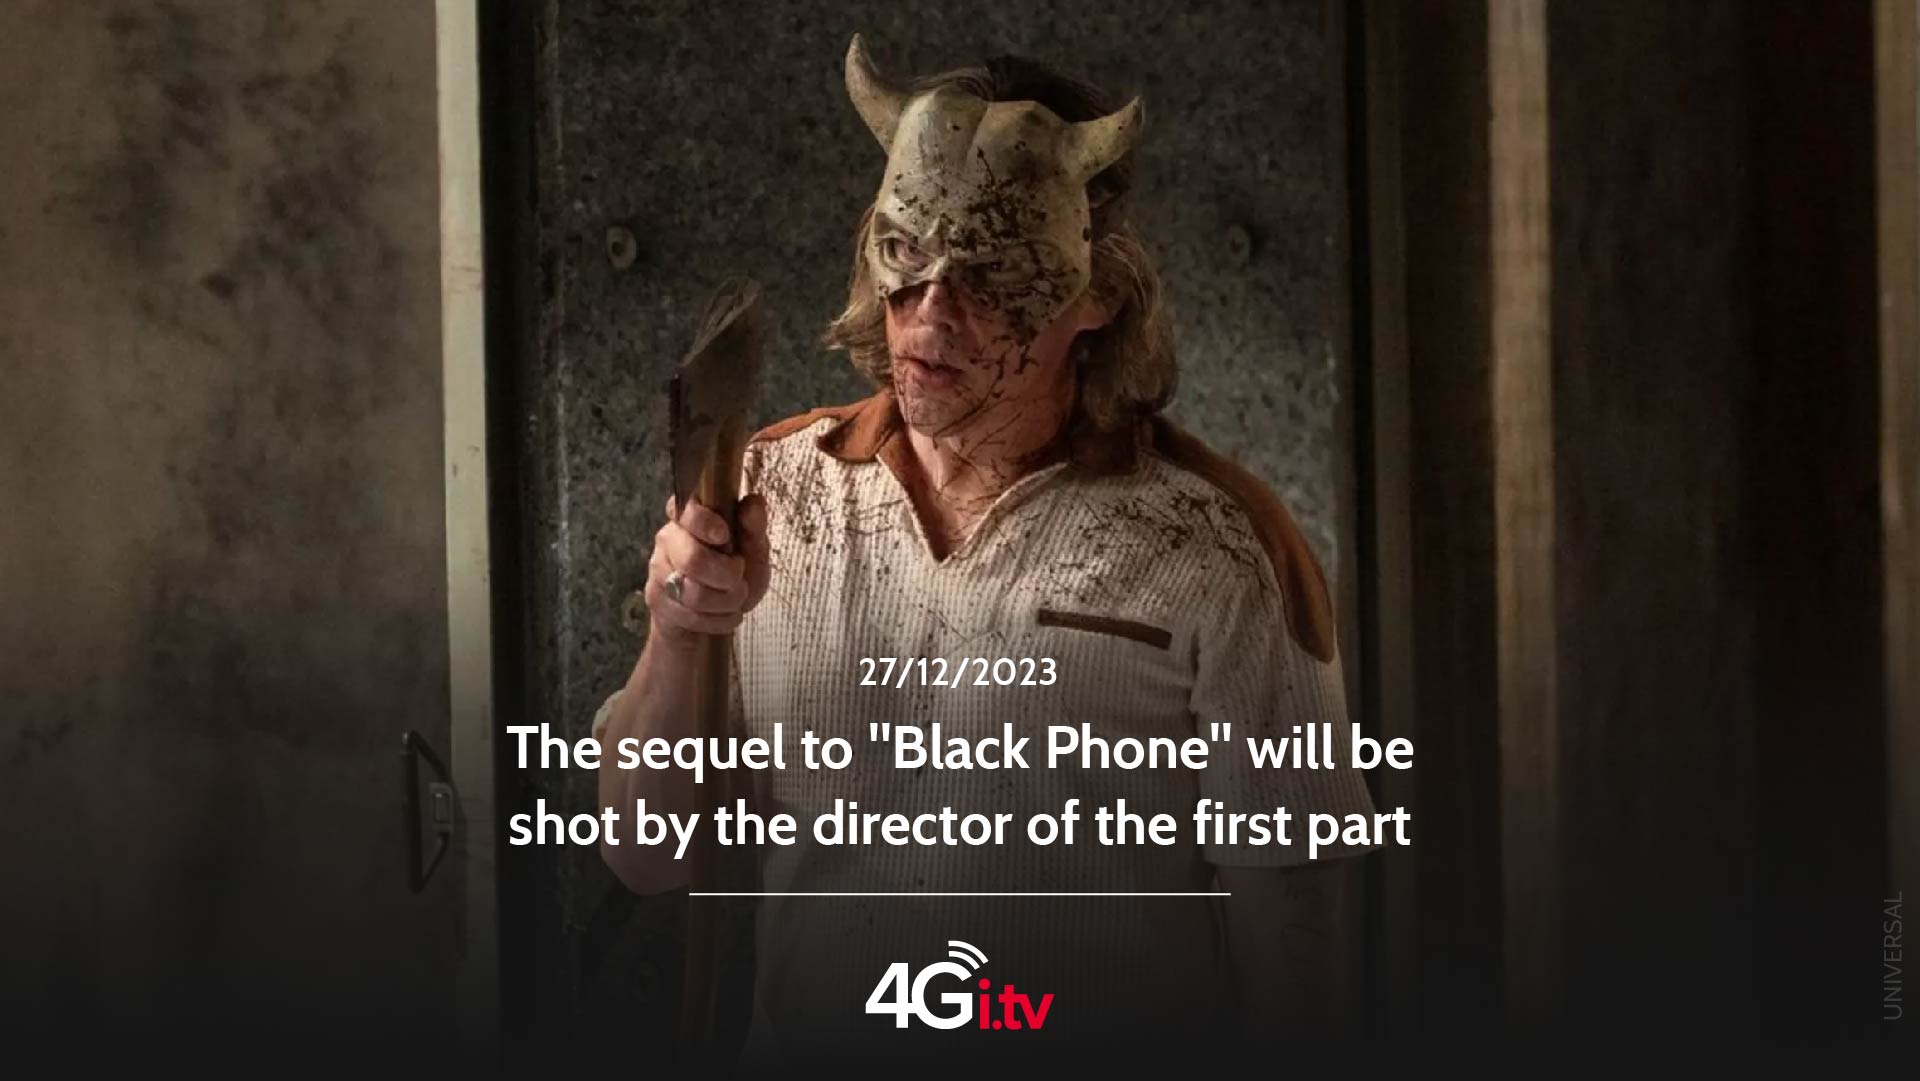 Подробнее о статье The sequel to “Black Phone” will be shot by the director of the first part